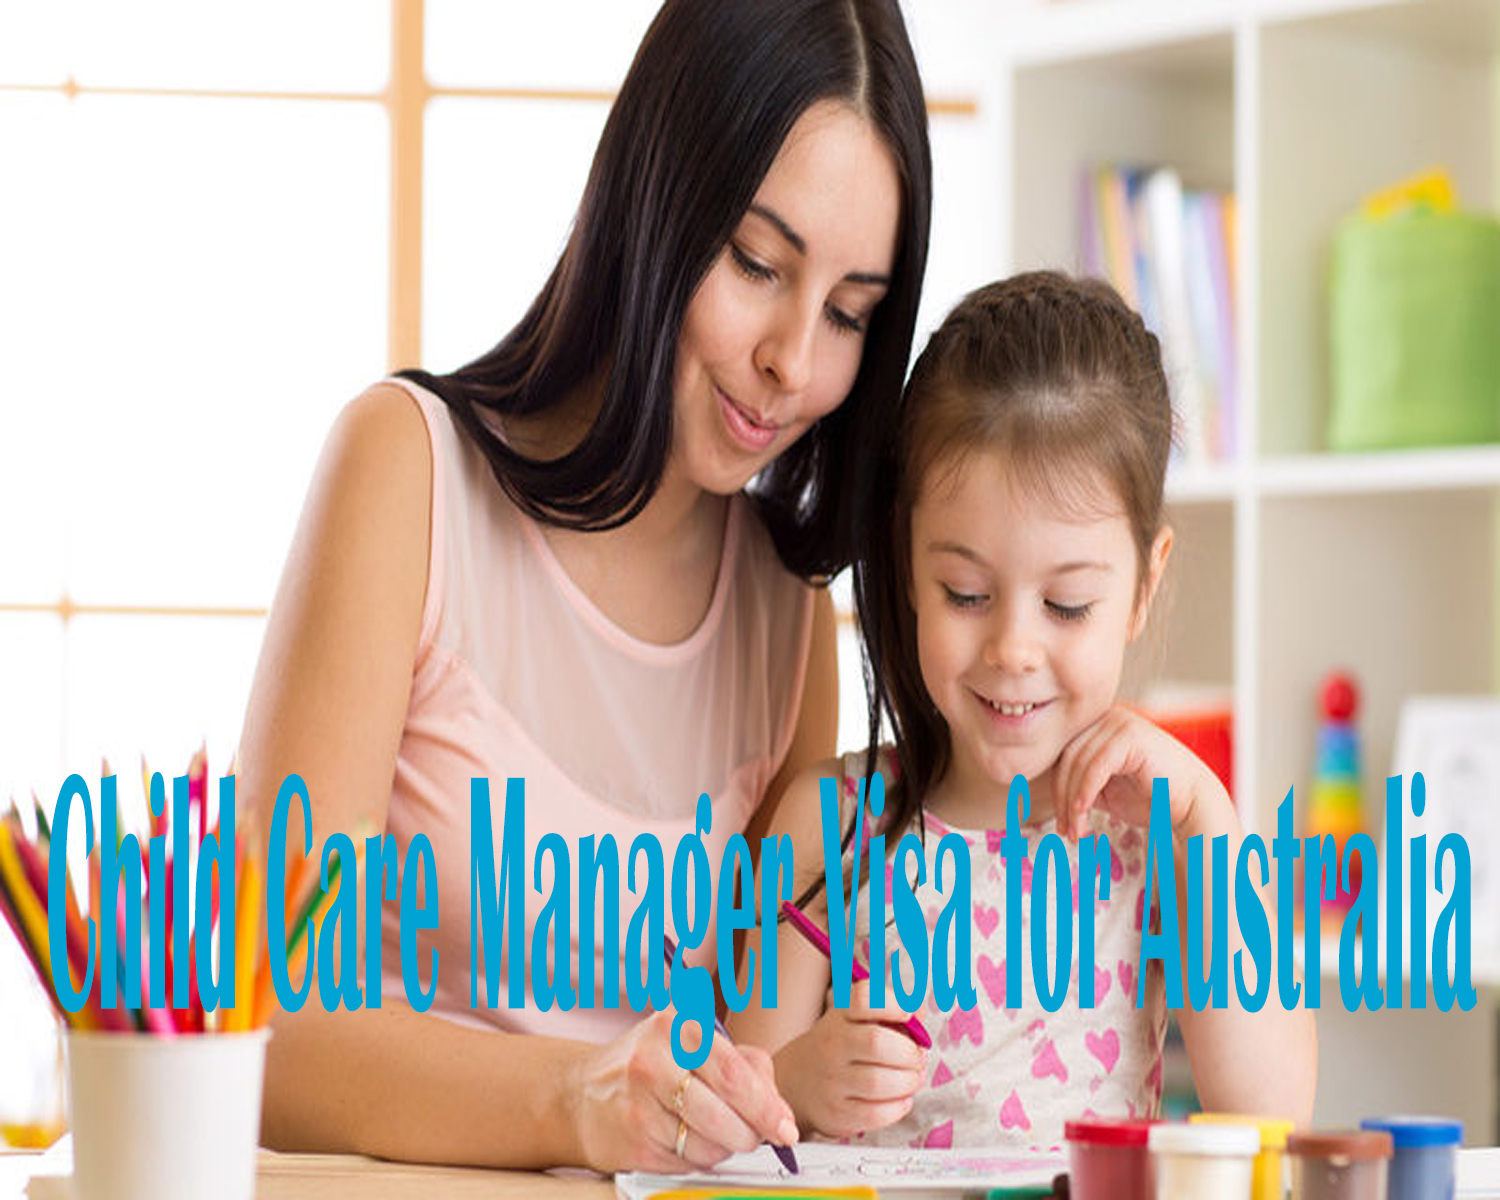 Process to Get Child Care Manager Visa for Australia